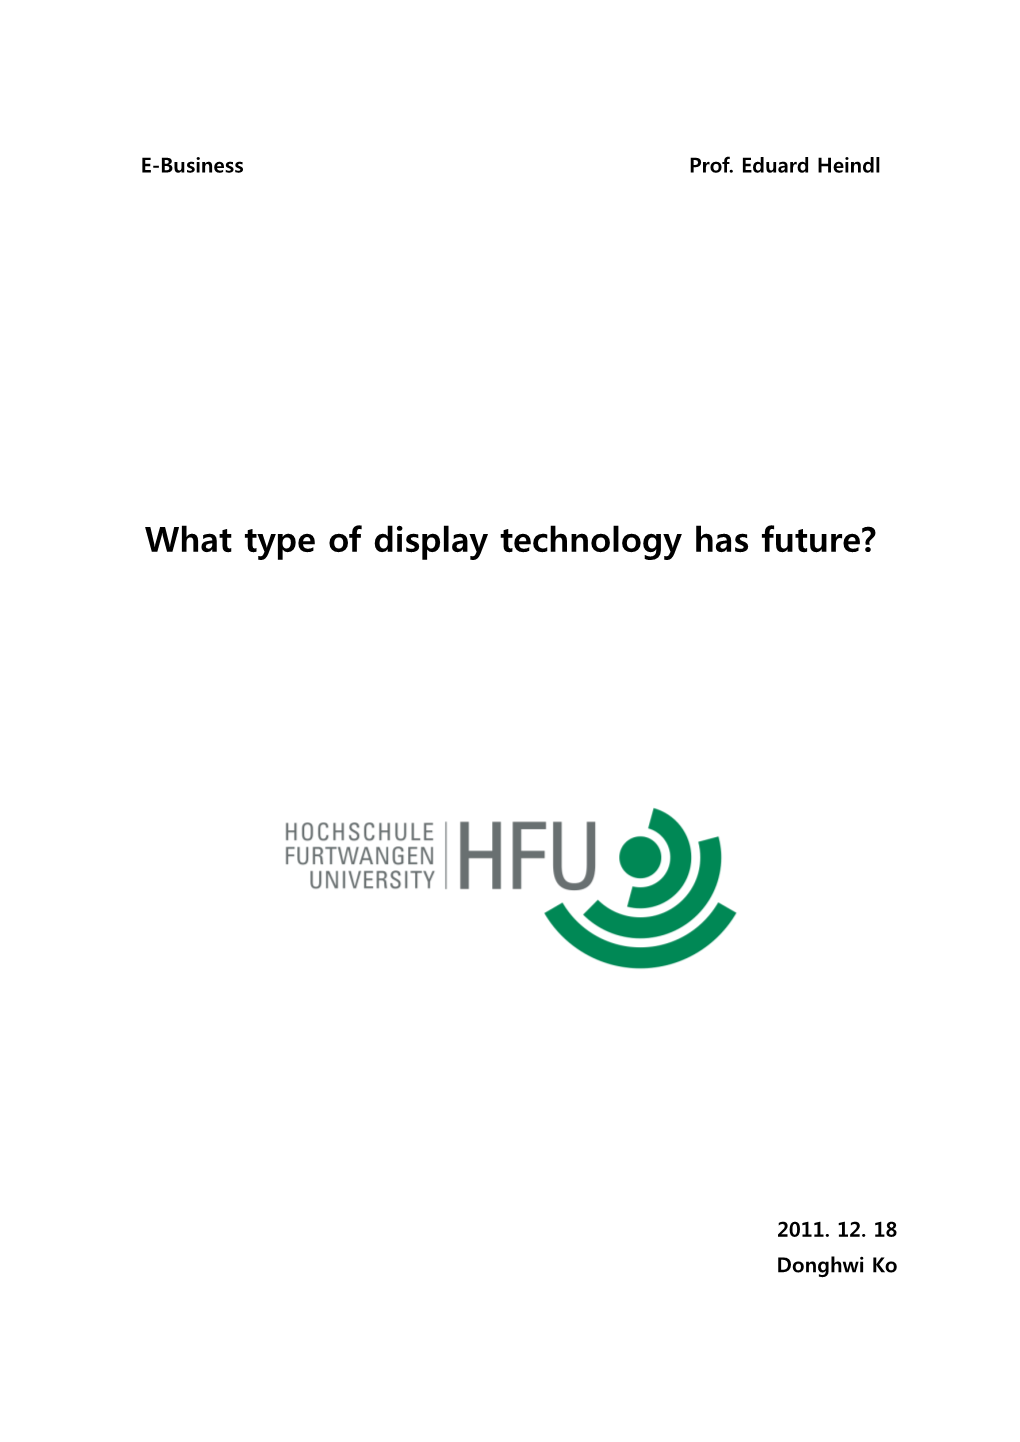 What Type of Display Technology Has Future?